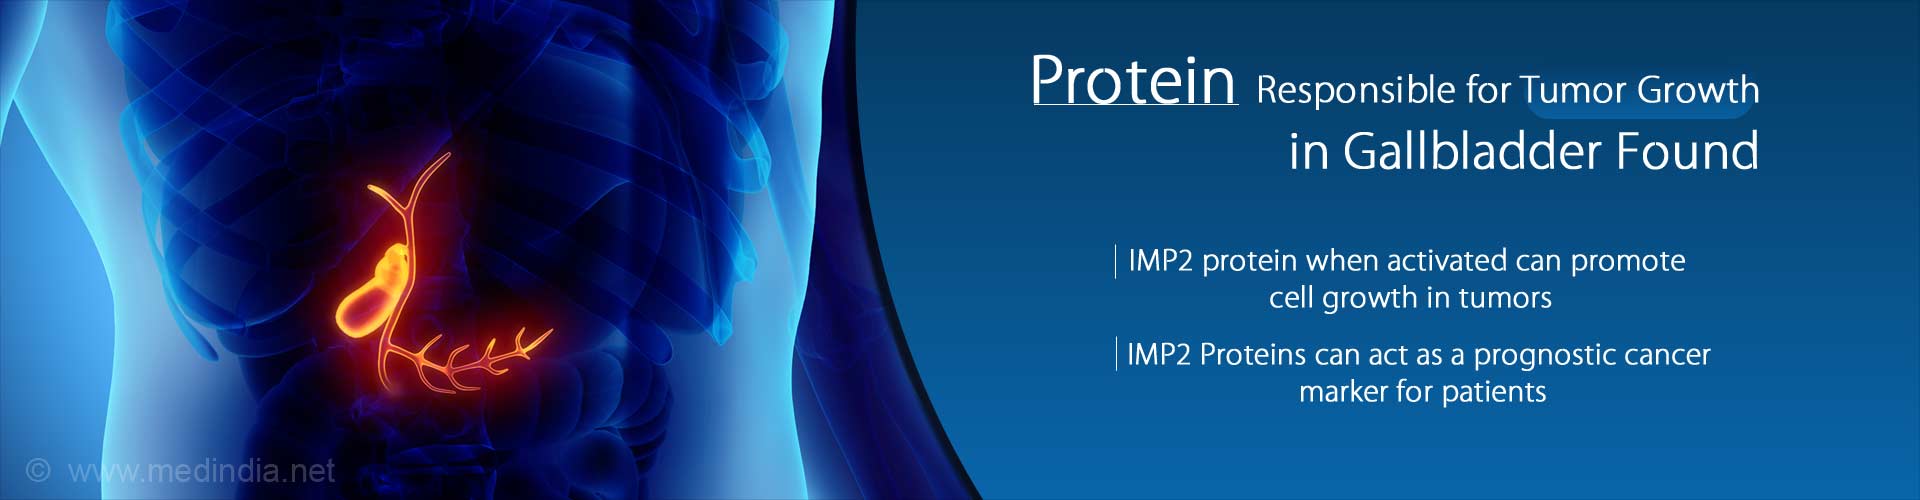 Protein responsible for tumor growth in gallbladder found
- IMP2 protein when activated can promote cell growth in tumors
- These proteins can help predict the outcomes after the cancer treatment
- IMP2 proteins can act as a prognostic cancer marker for patients